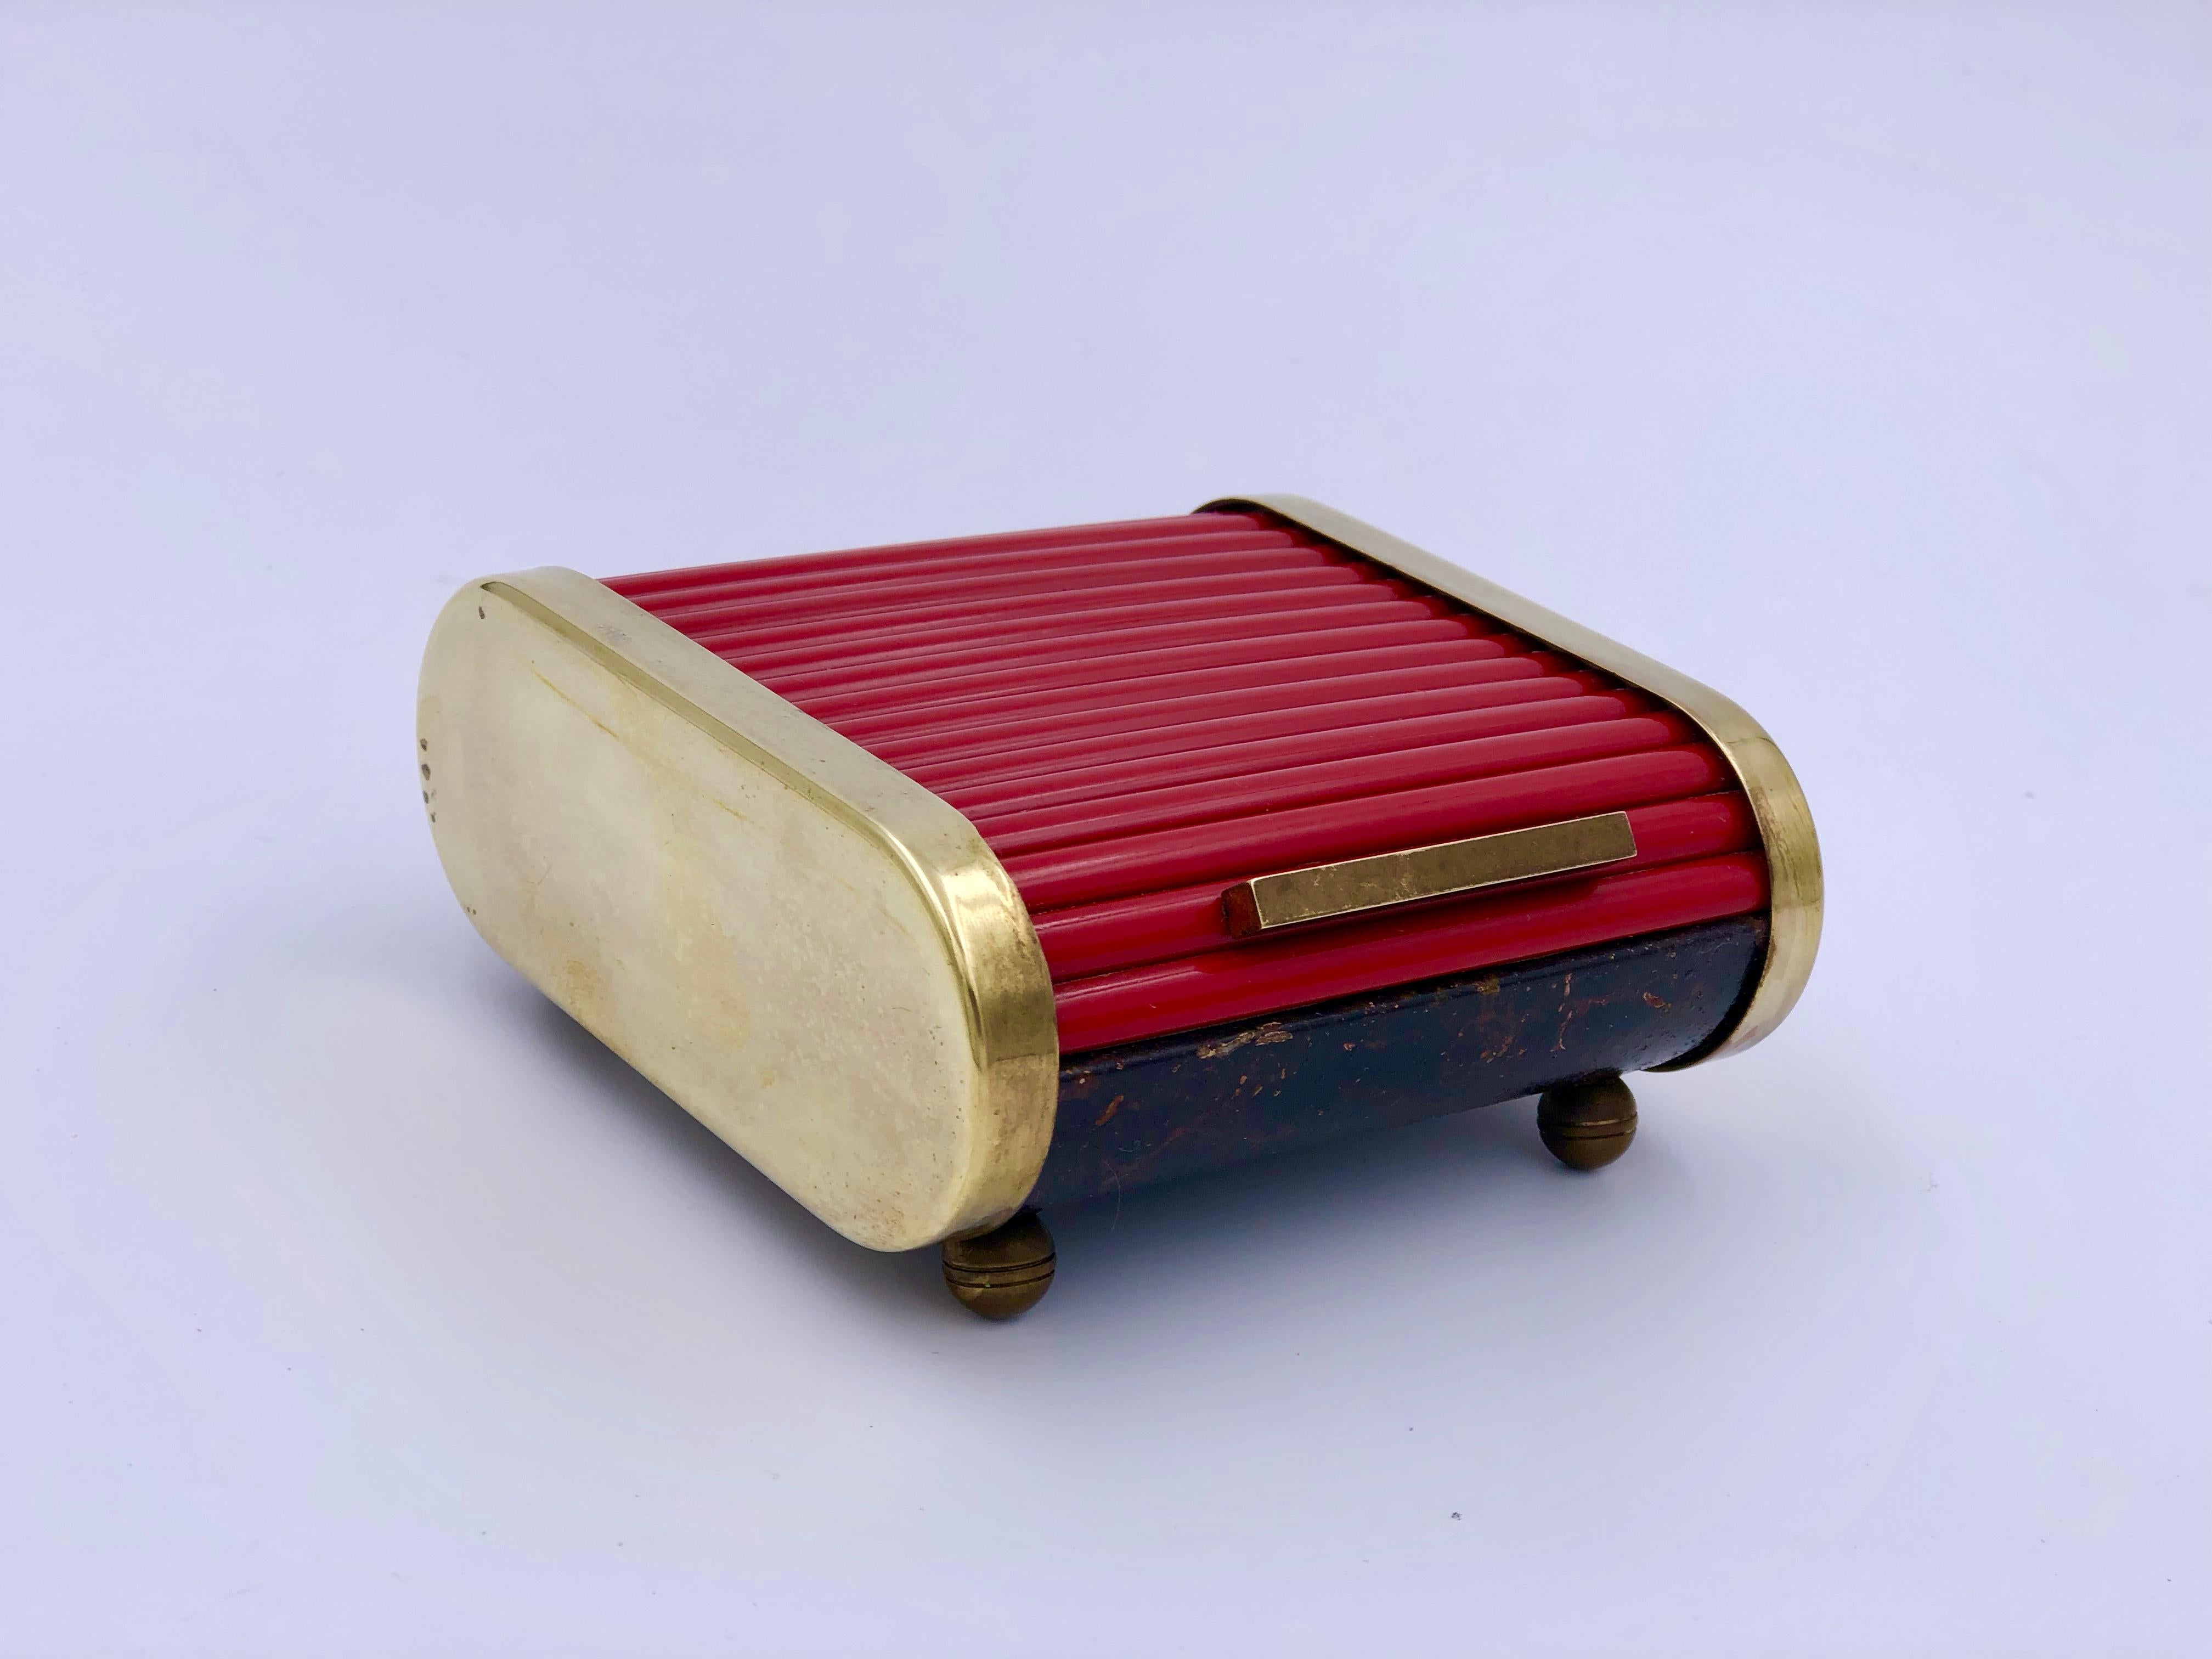 Early 20th century American Art Deco industrial desk storage caddy or cigarette holder by Park Sherman. The box has a tambour style top made of red bakelite and a faux marble base. It has brass accents on either side, a brass handle, and is raised